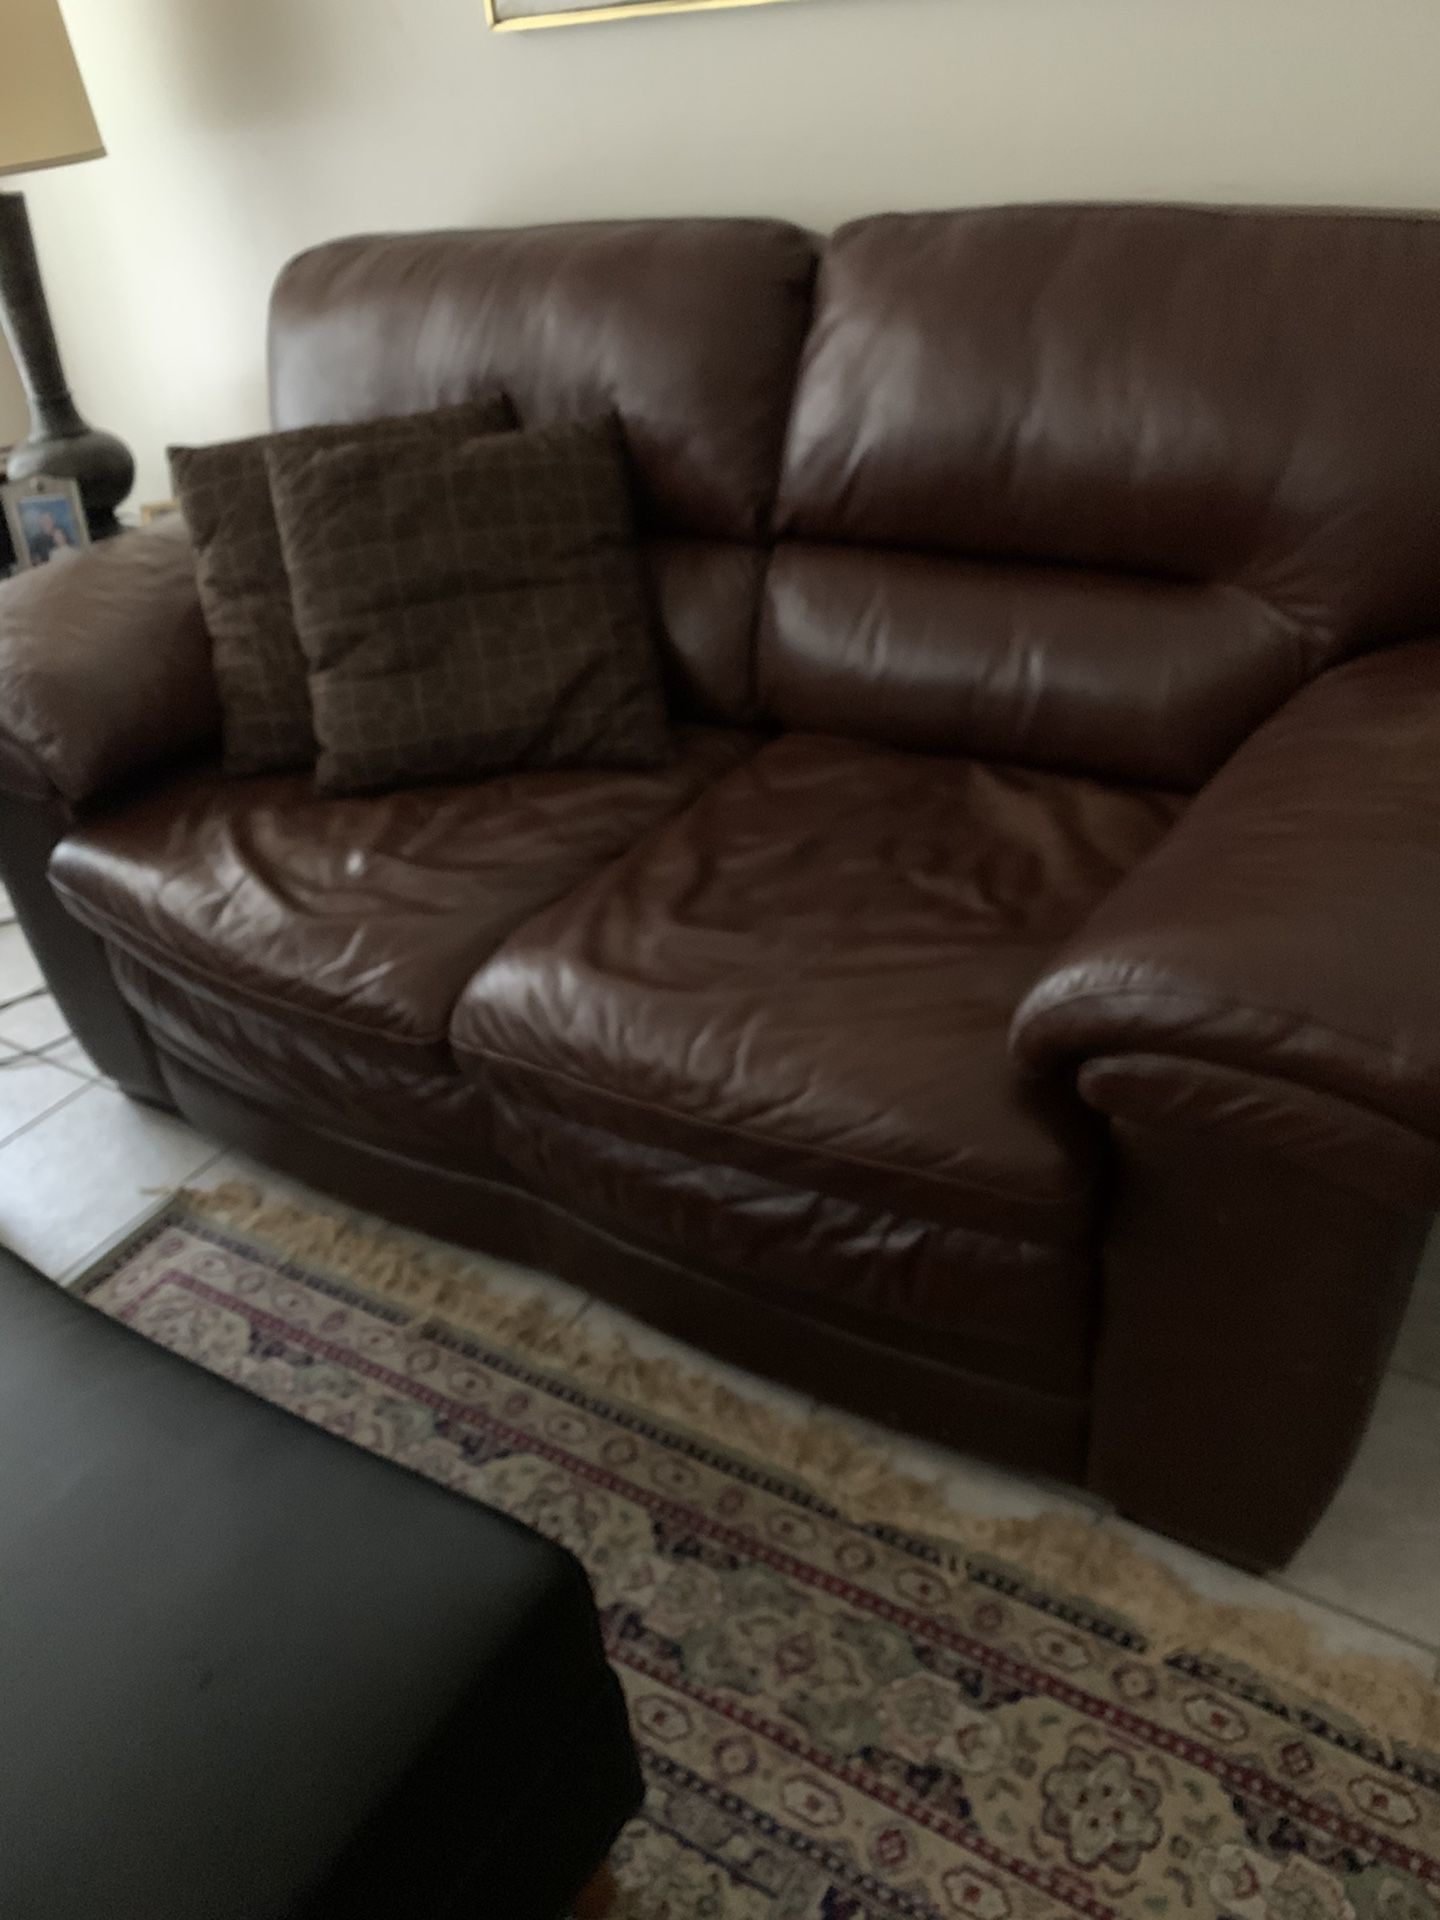 Leather couches for free